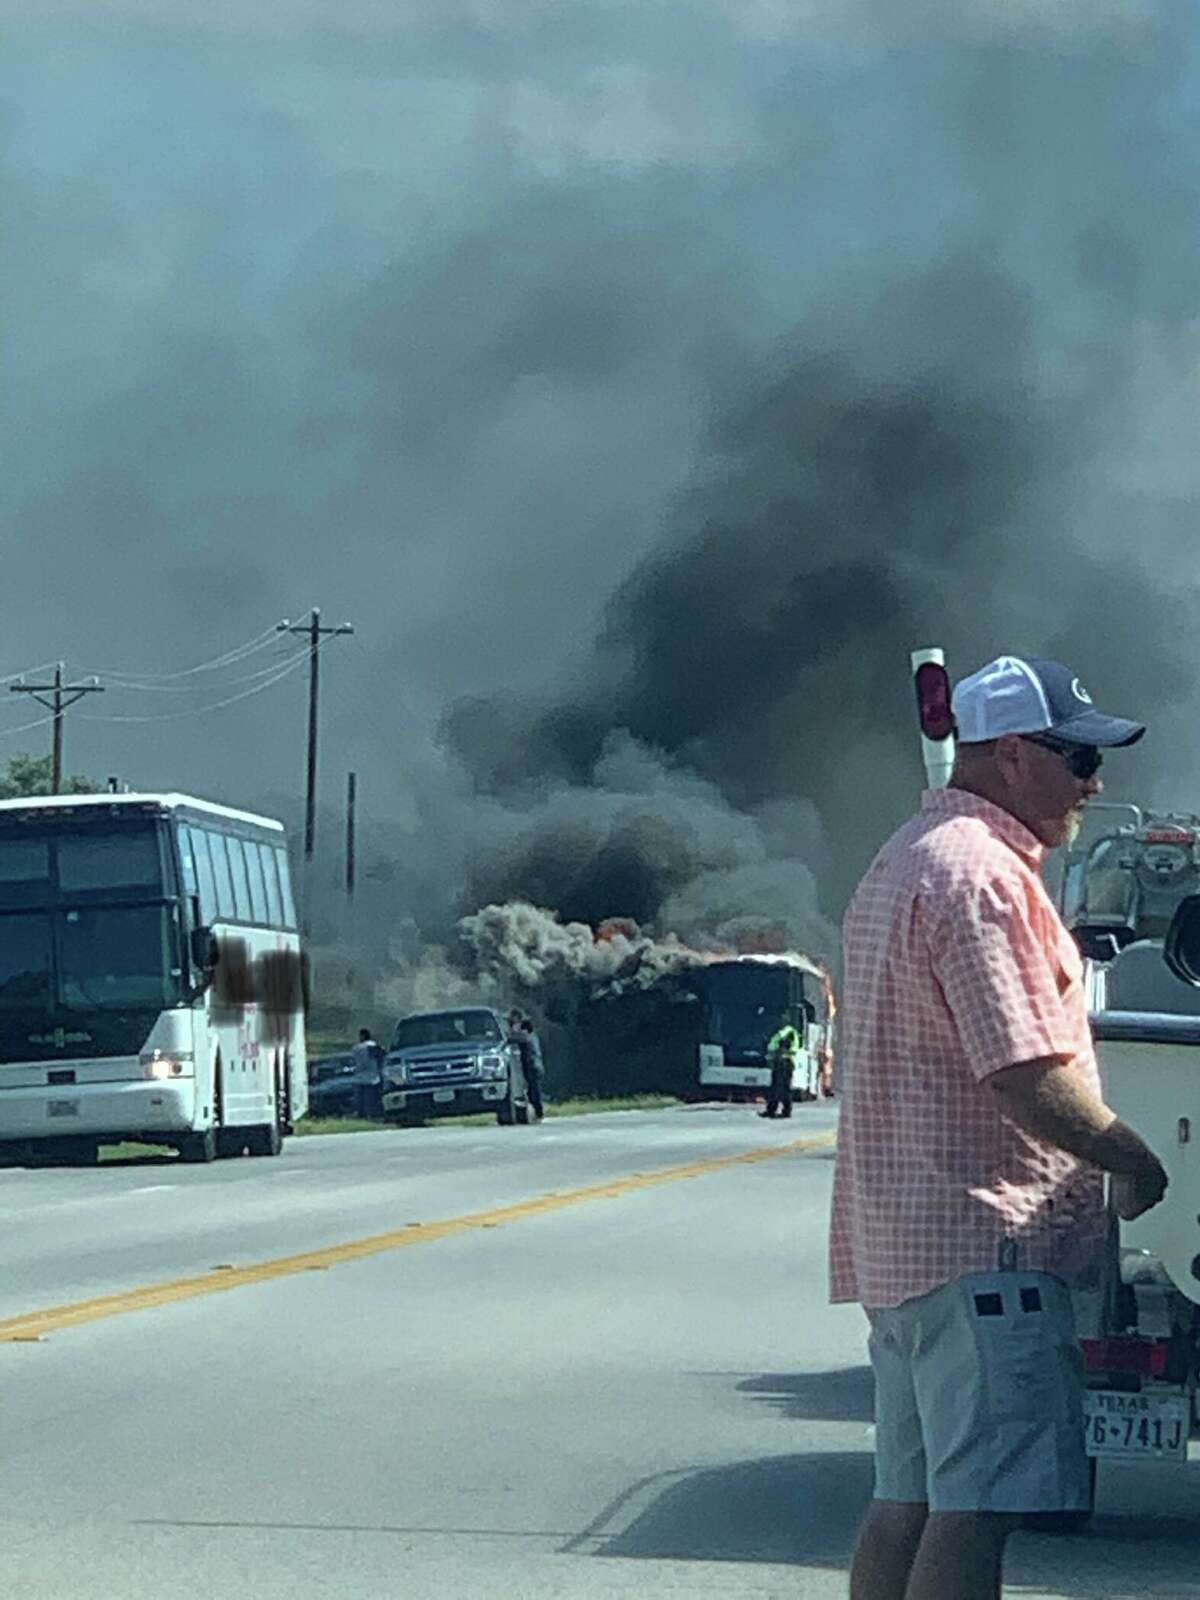 A charter bus headed to San Antonio engulfed in flames Thursday afternoon on U.S. Highway 281 near Ranch Road 1323 in Blanco County, the Blanco County Sheriff's Office confirmed.